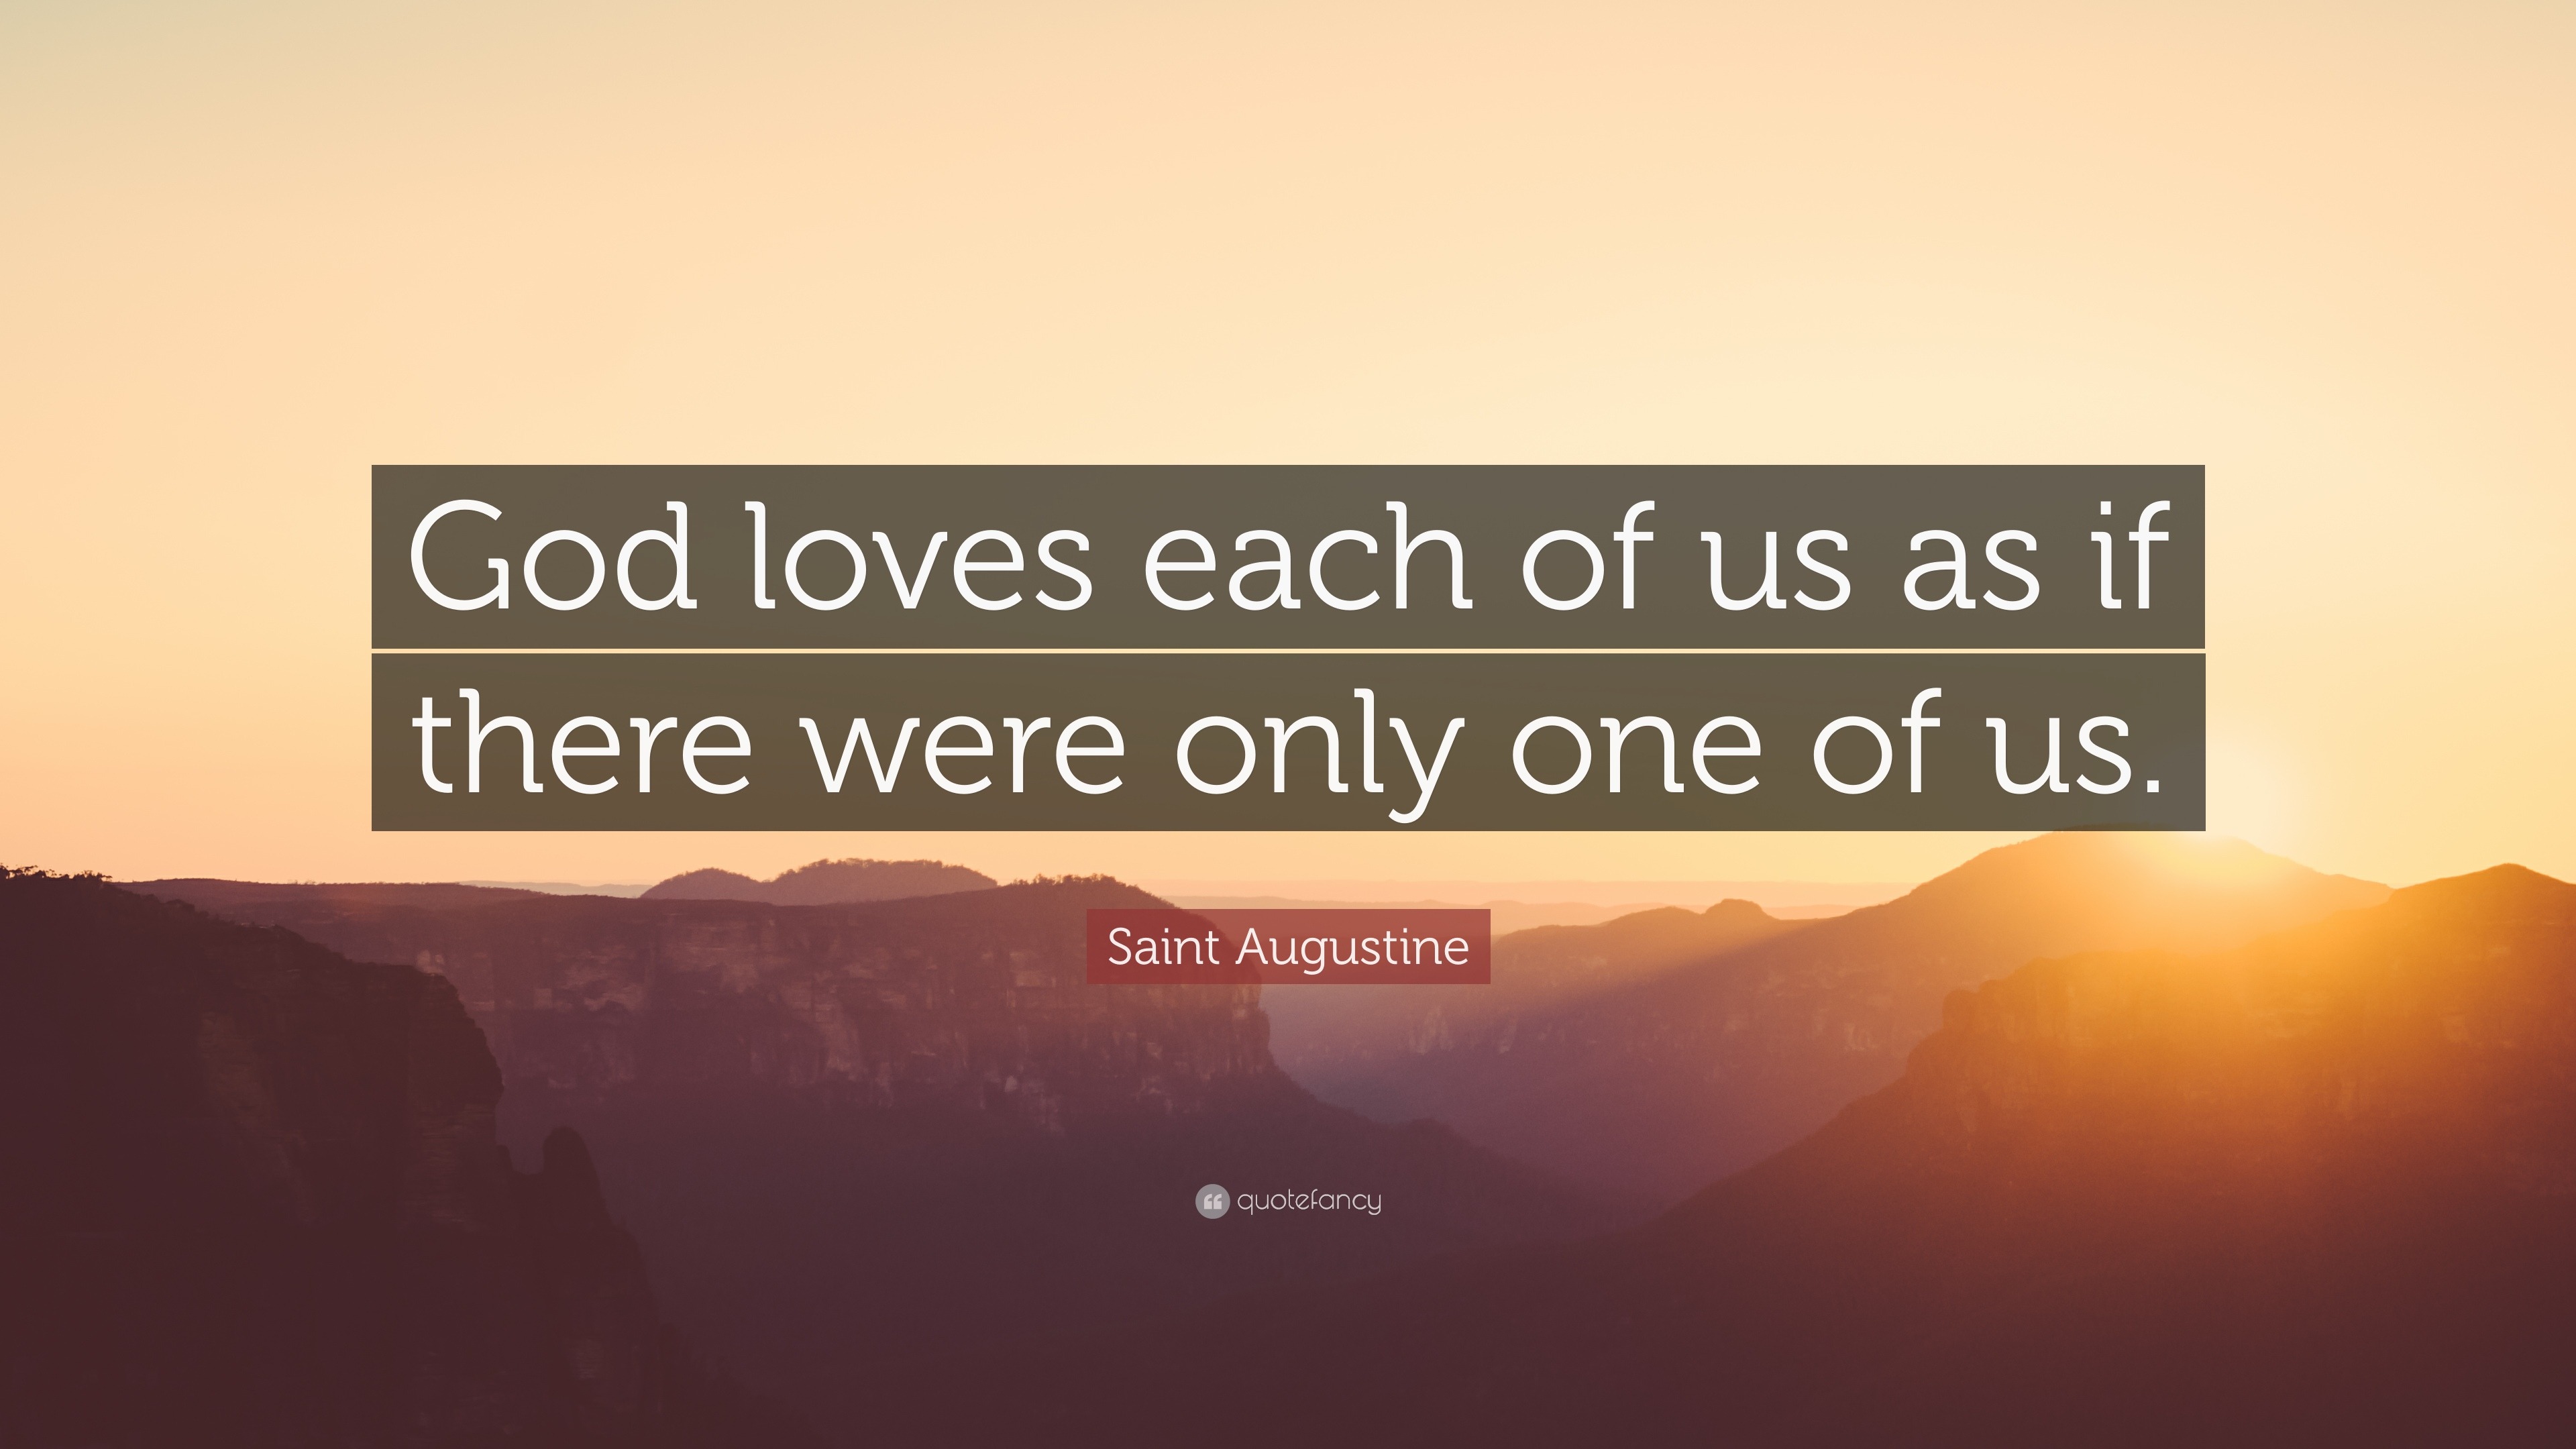 Saint Augustine Quote: “God loves each of us as if there were only one of us.” (12 wallpapers) - Quotefancy